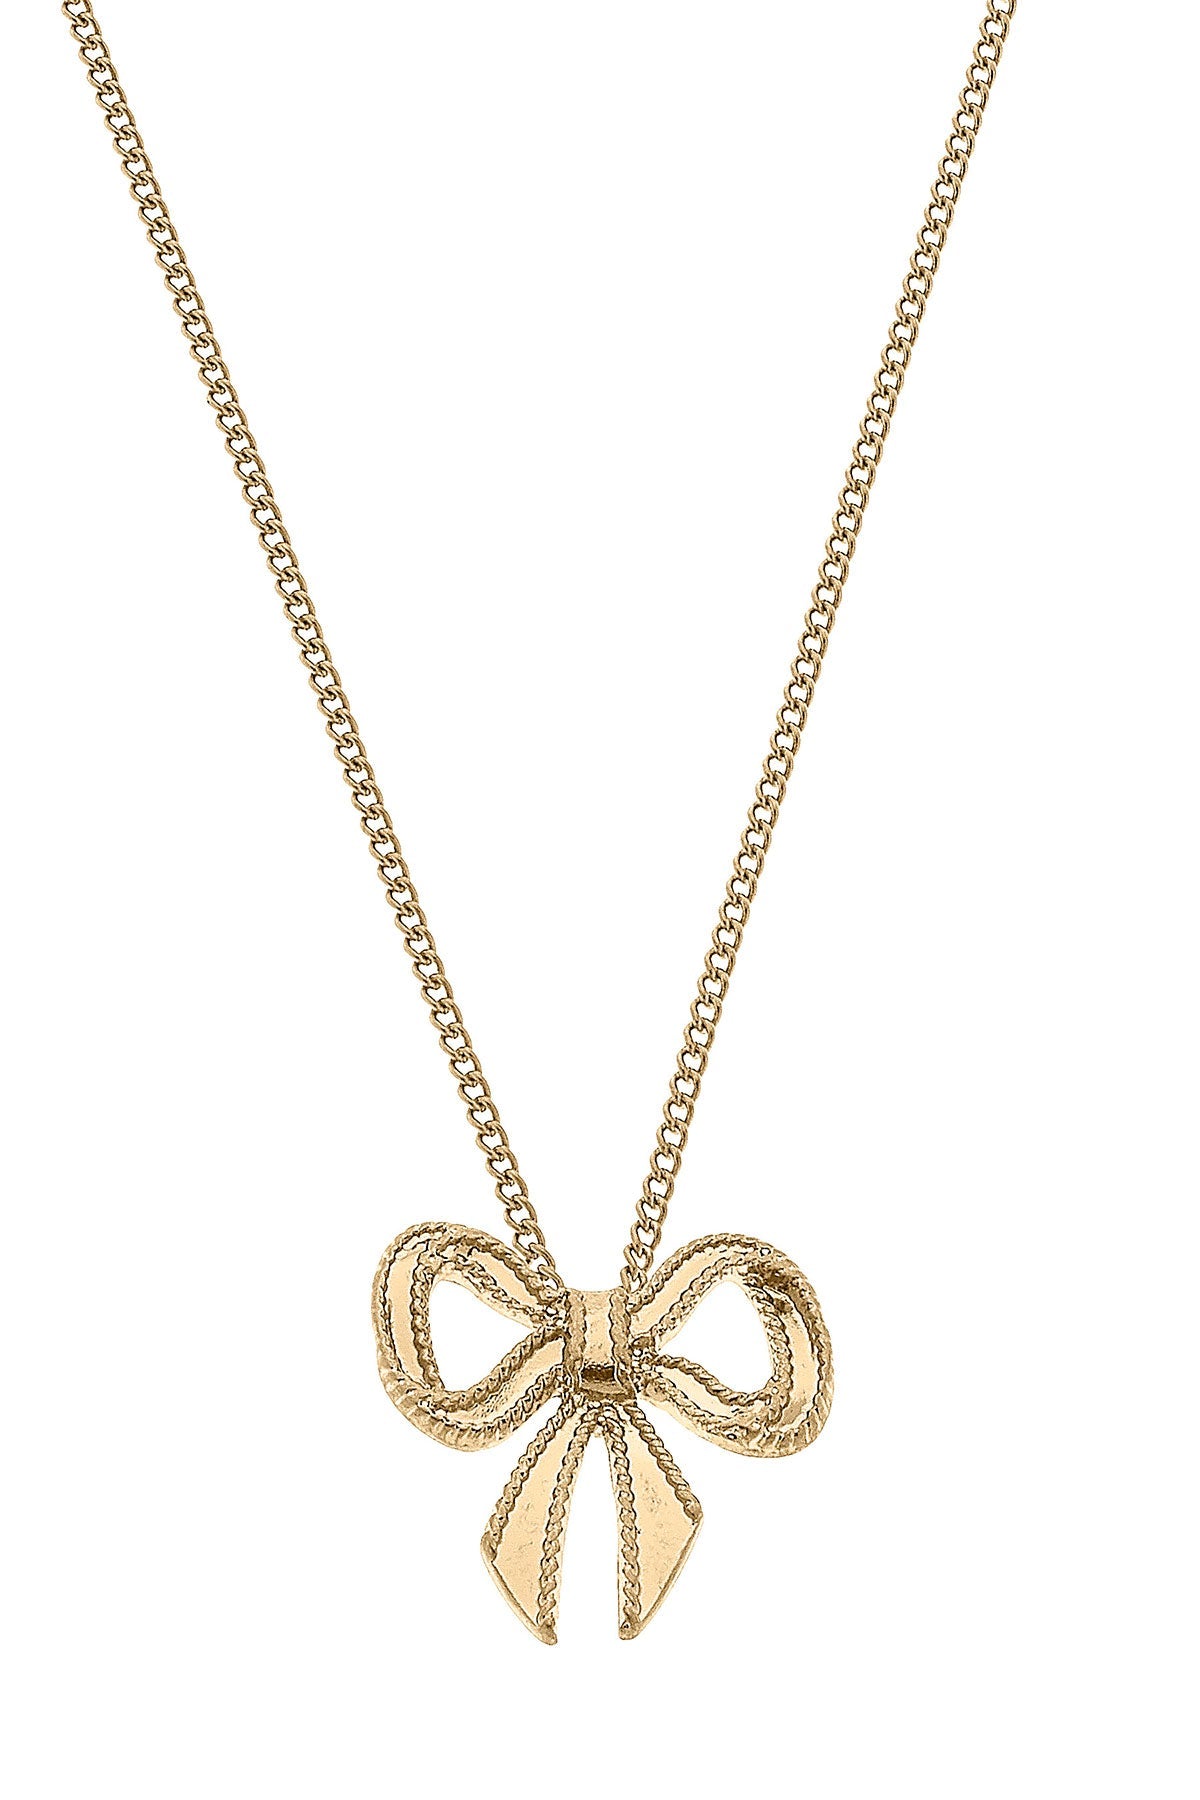 Dominique Bow Pendant Necklace in Worn Gold by CANVAS